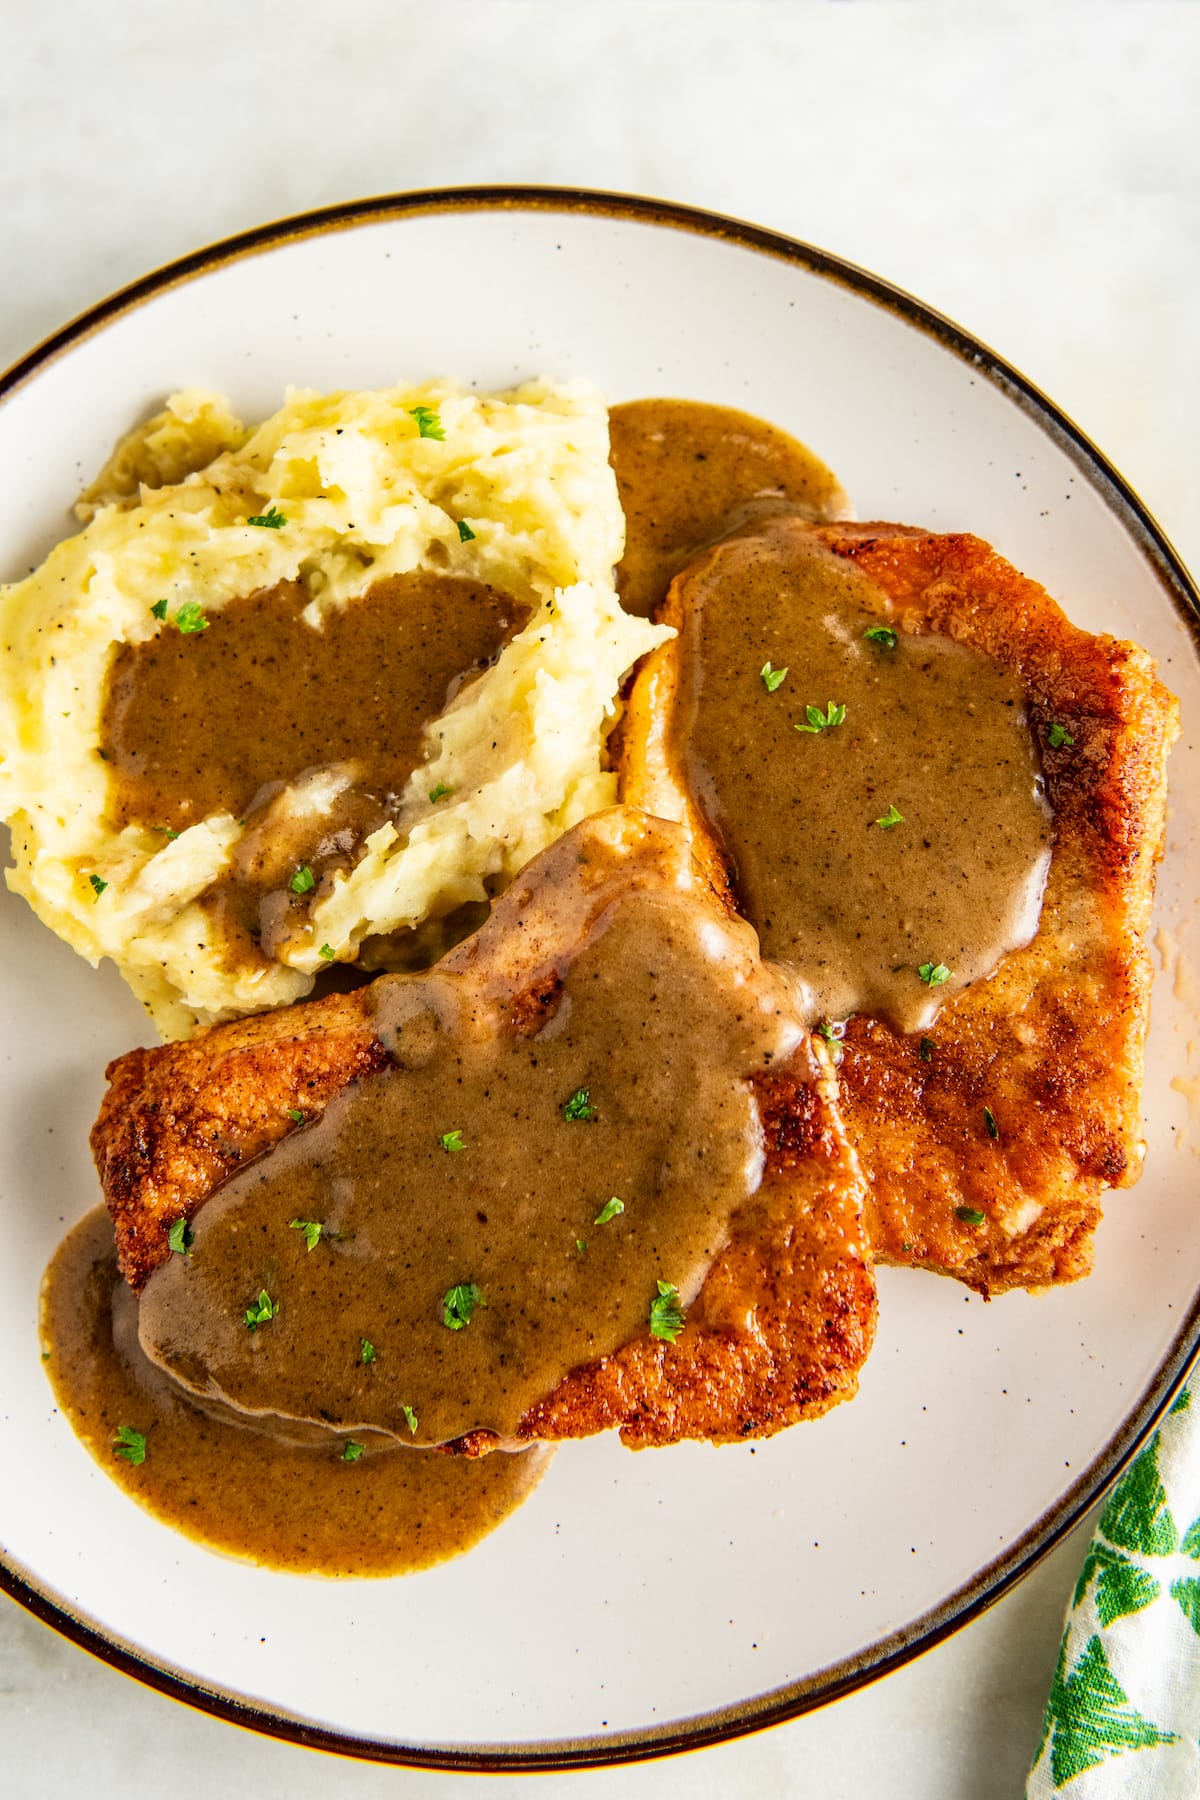 Overhead view of a plate with two pork chops and a pile of mashed potatoes, all covered in gravy.